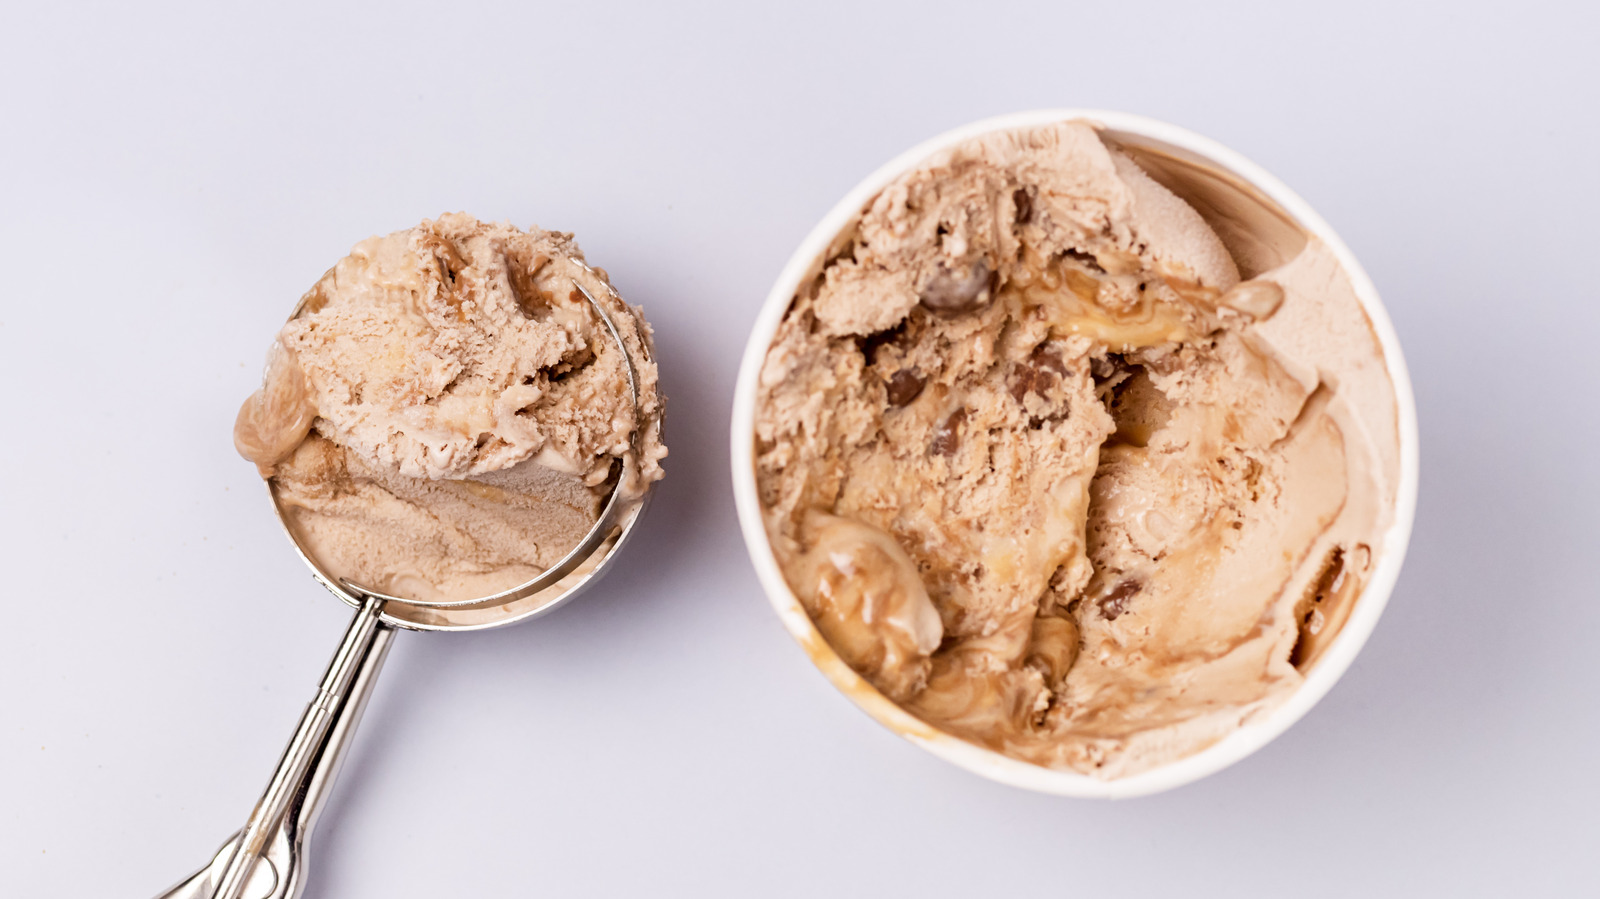 https://www.tastingtable.com/img/gallery/the-koozie-trick-to-keep-your-ice-cream-pint-from-melting/l-intro-1692756799.jpg